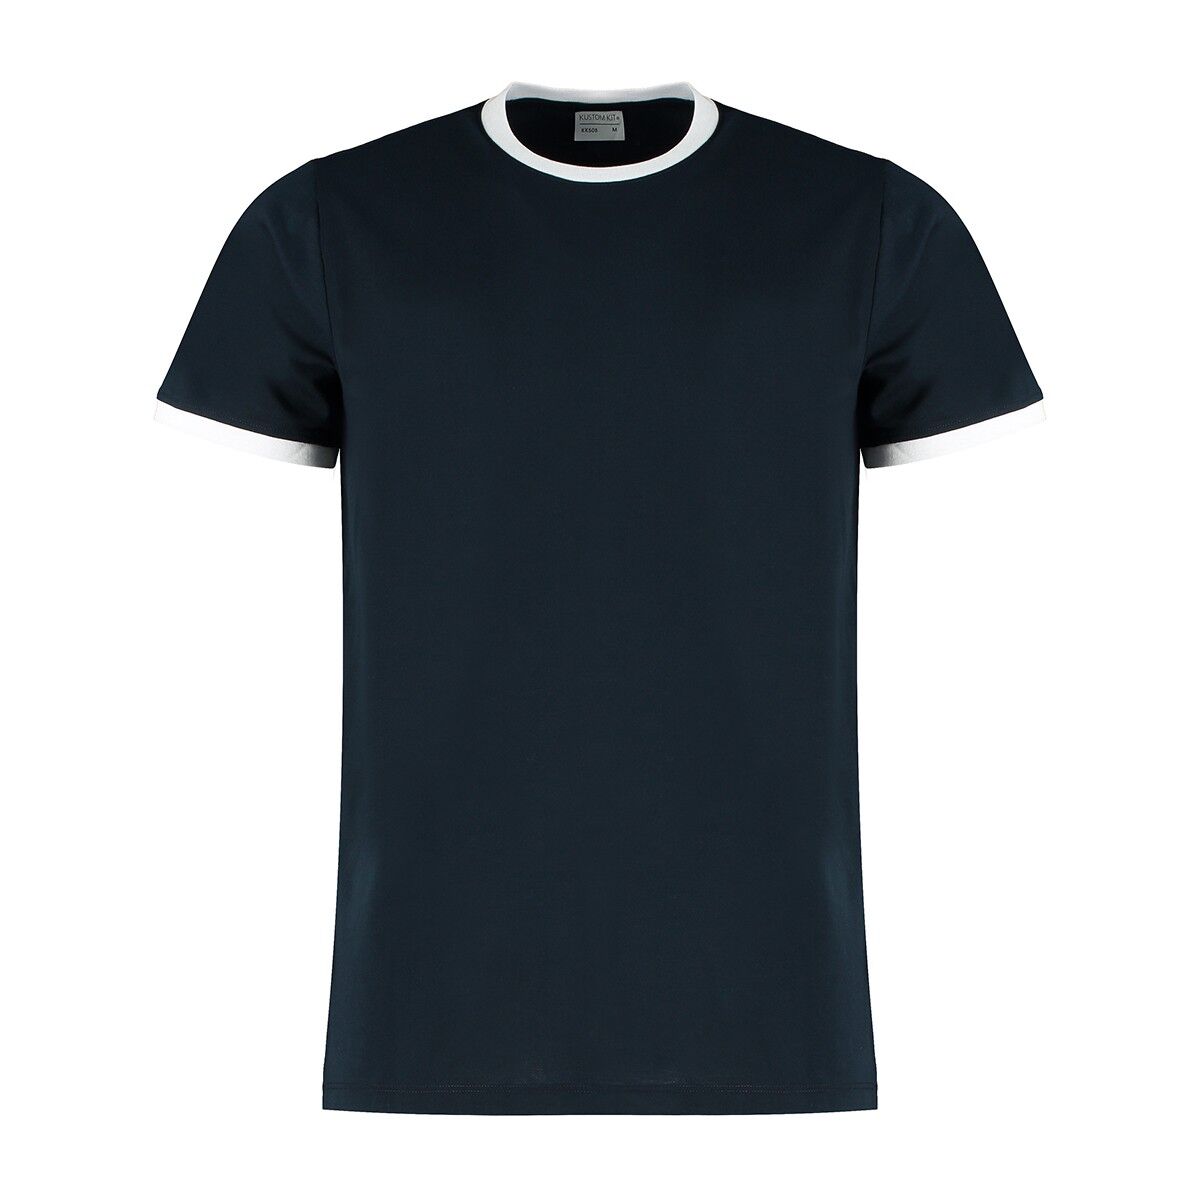 Contrast Ring Tee in Navy White